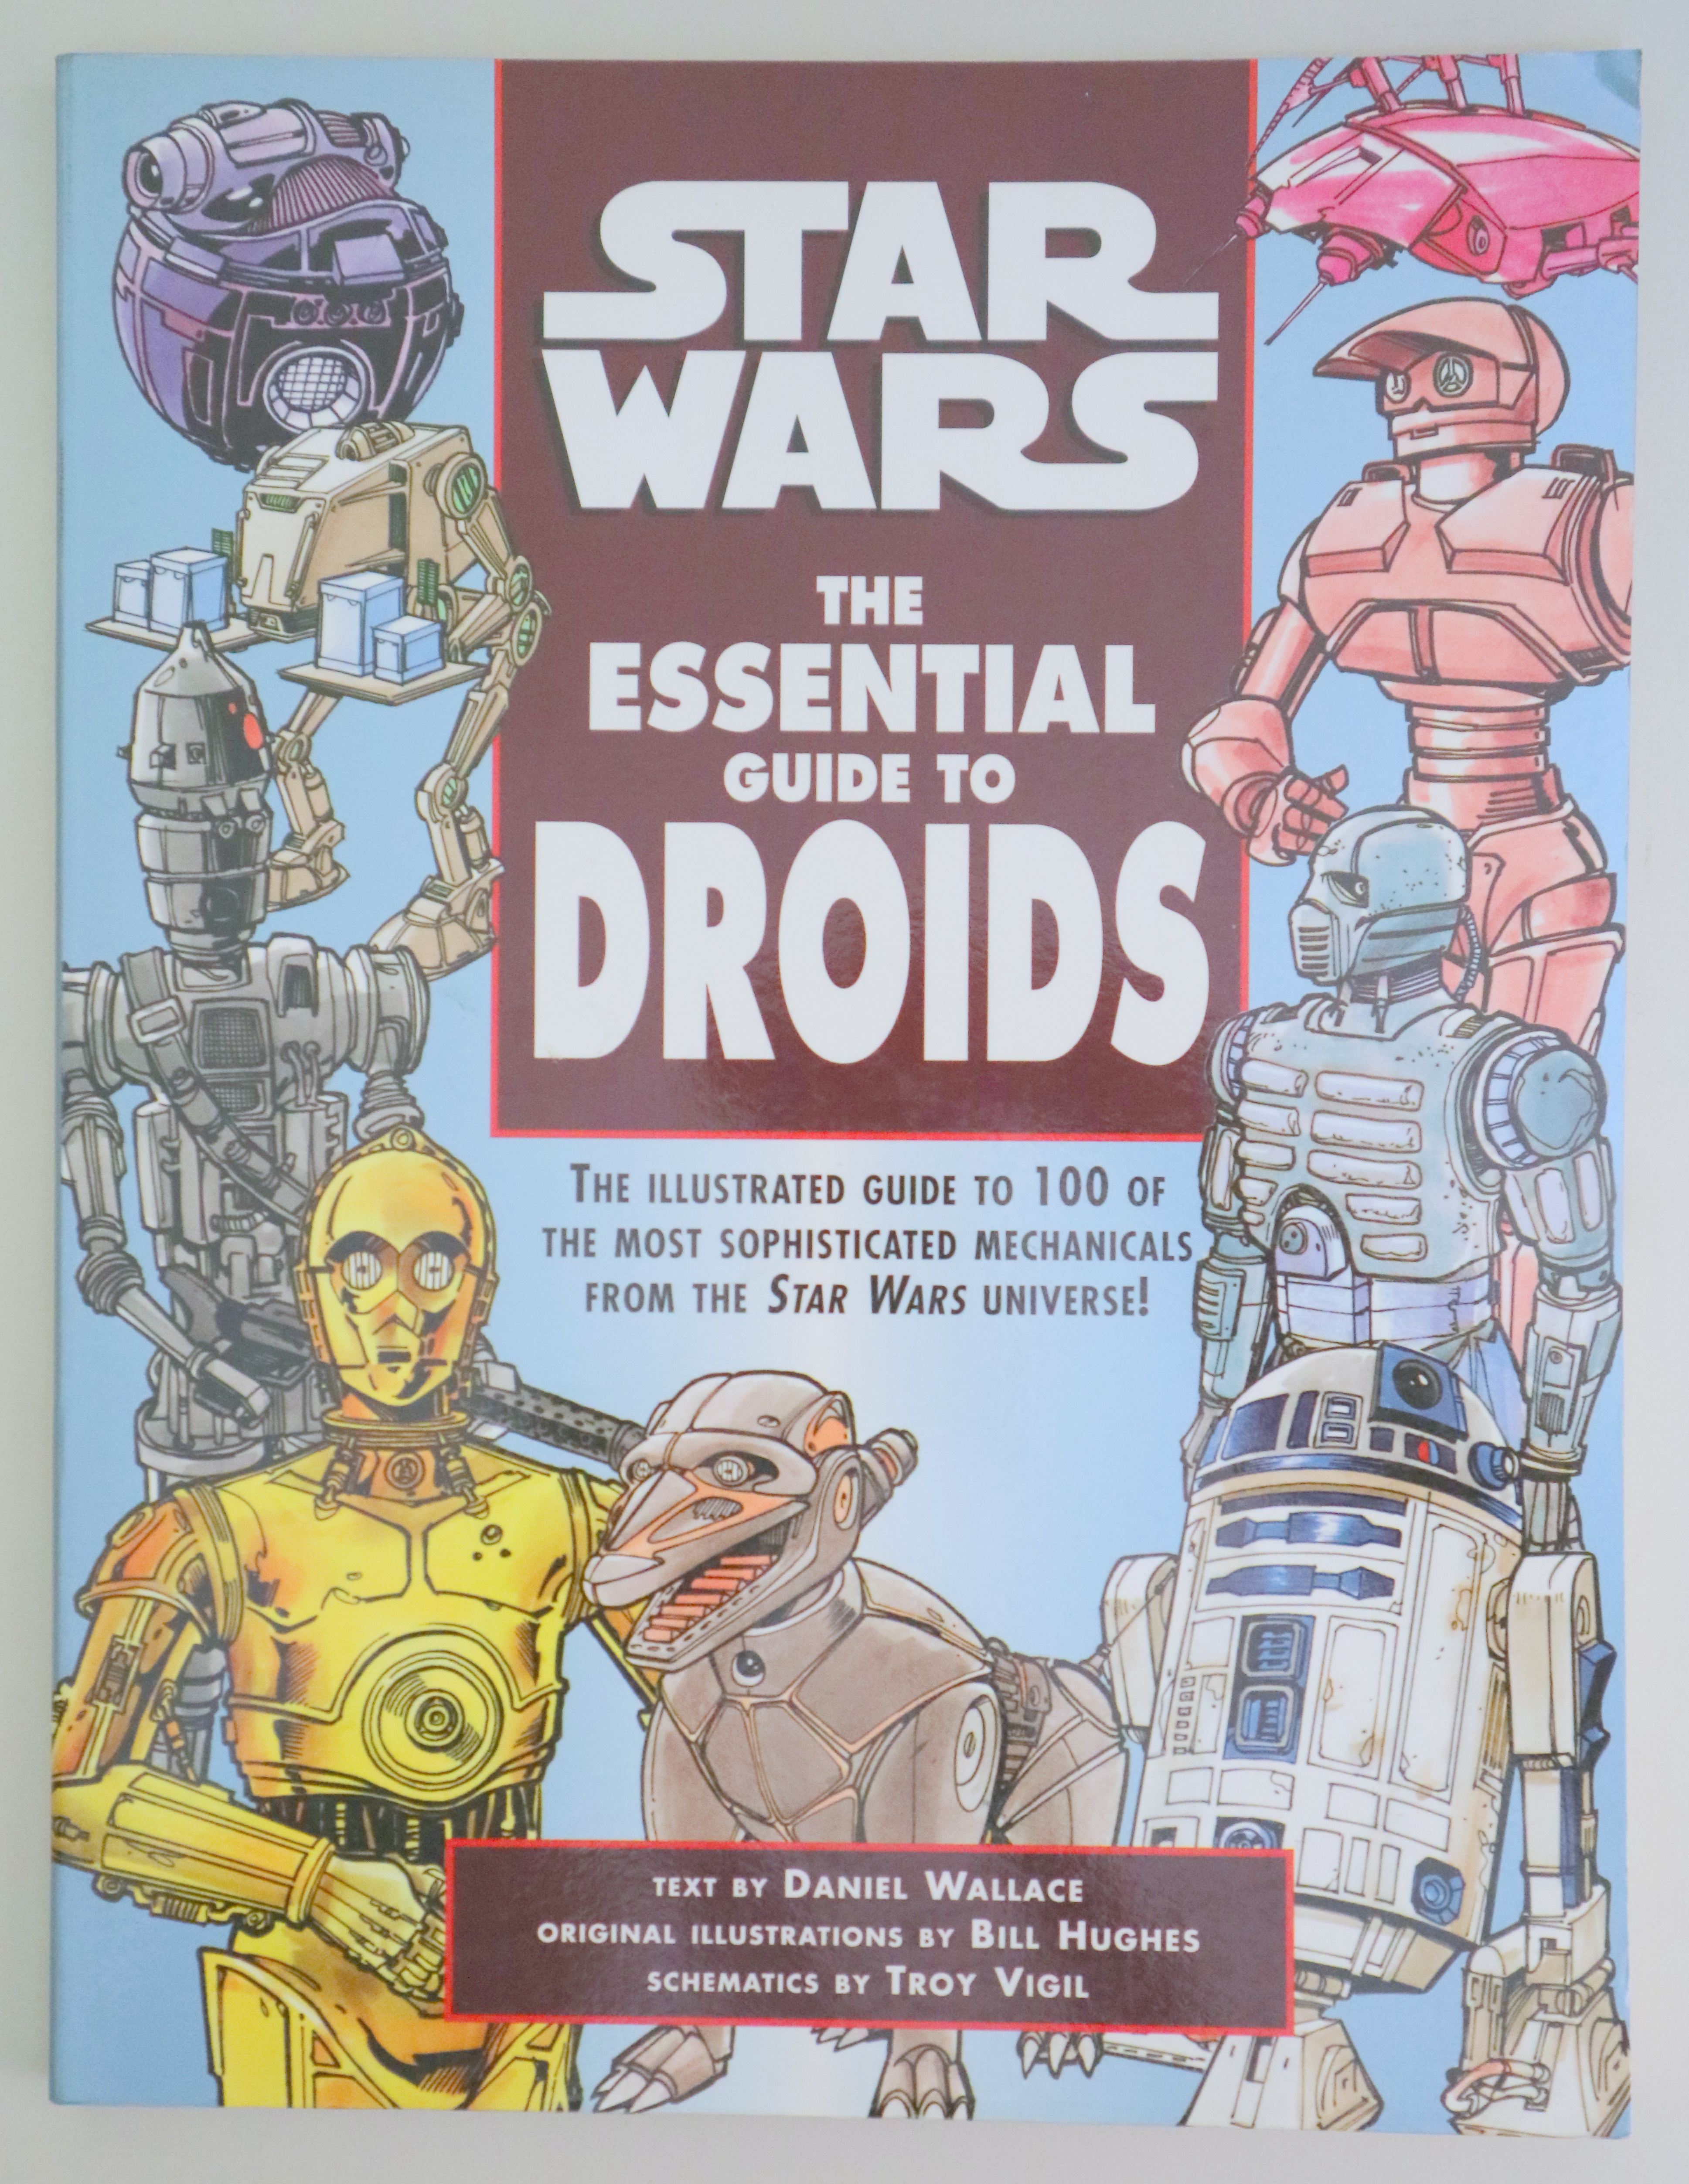 STAR WARS. THE ESSENTIAL GUIDE TO DROIDS - New York 1999 - Ilustrado - Book in english